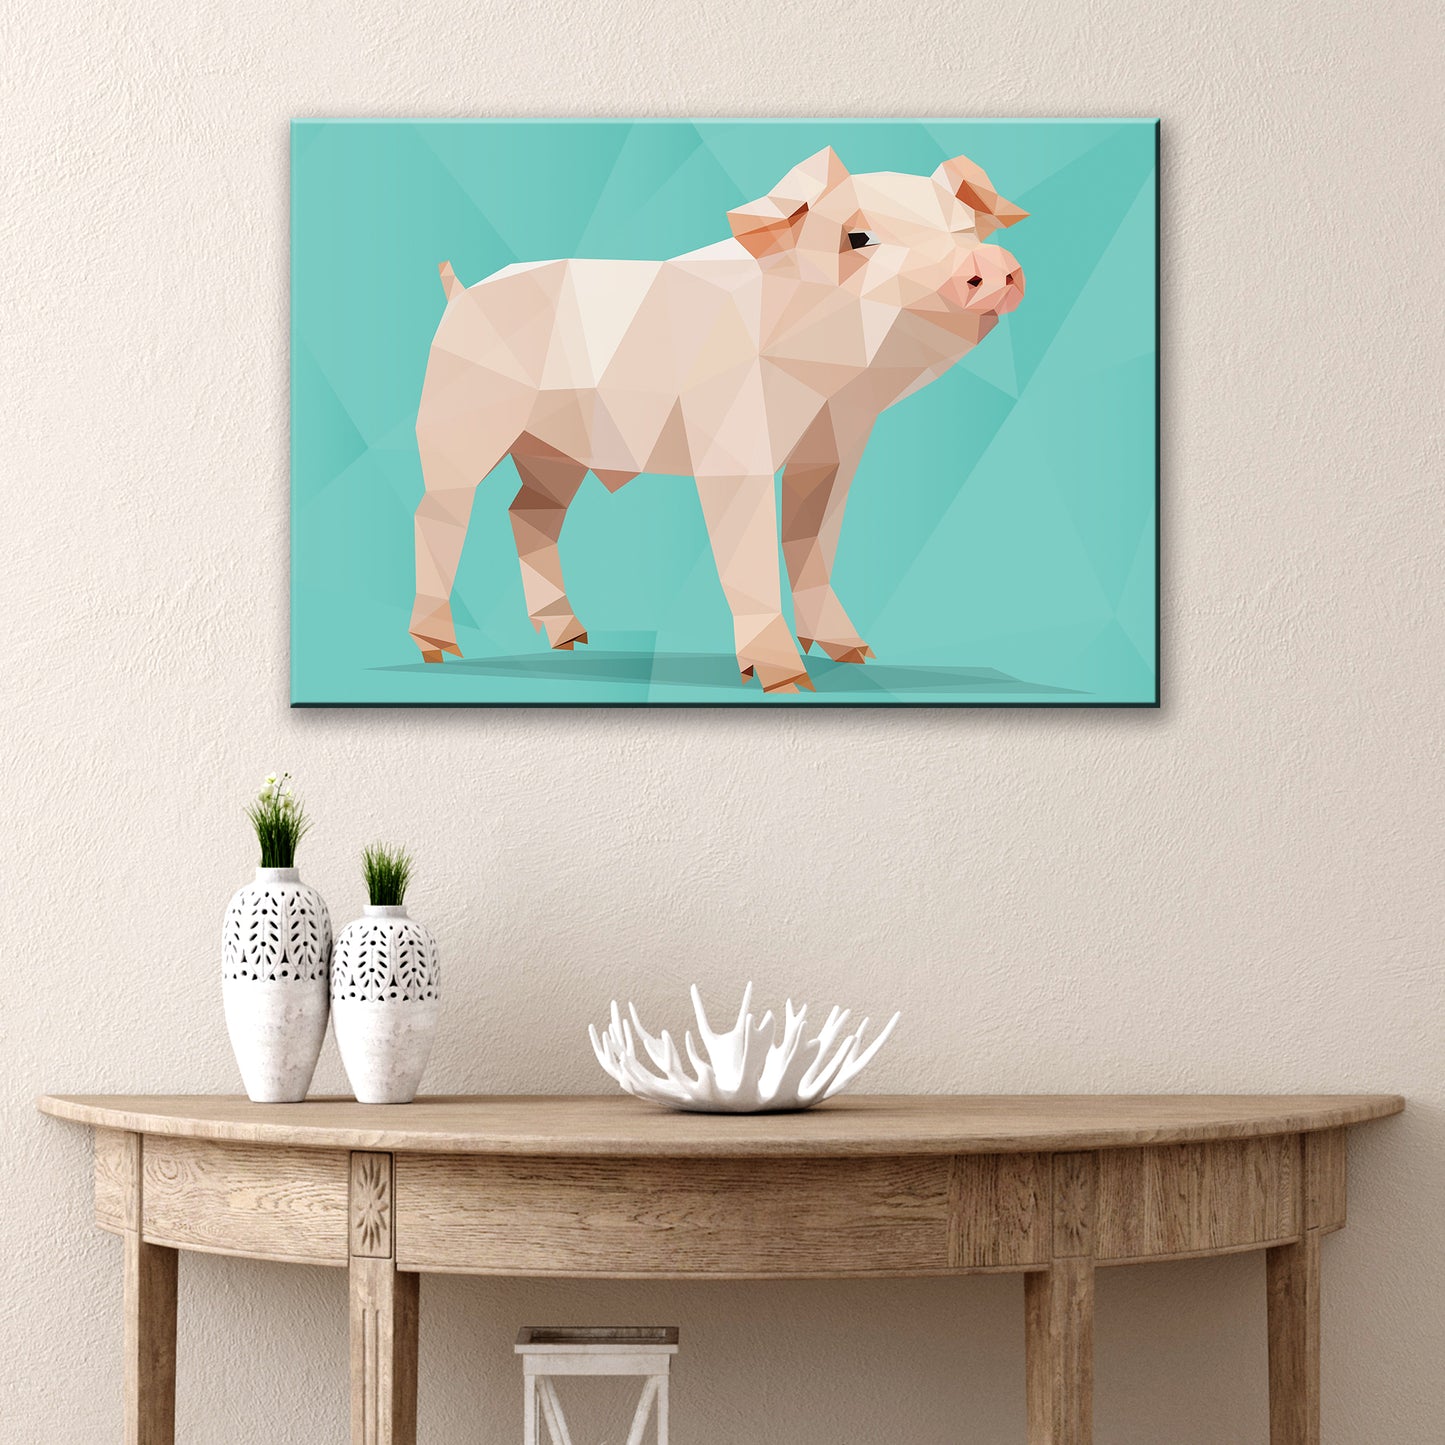 Lovely Geometric Pig Canvas Wall Art Style 2 - Image by Tailored Canvases